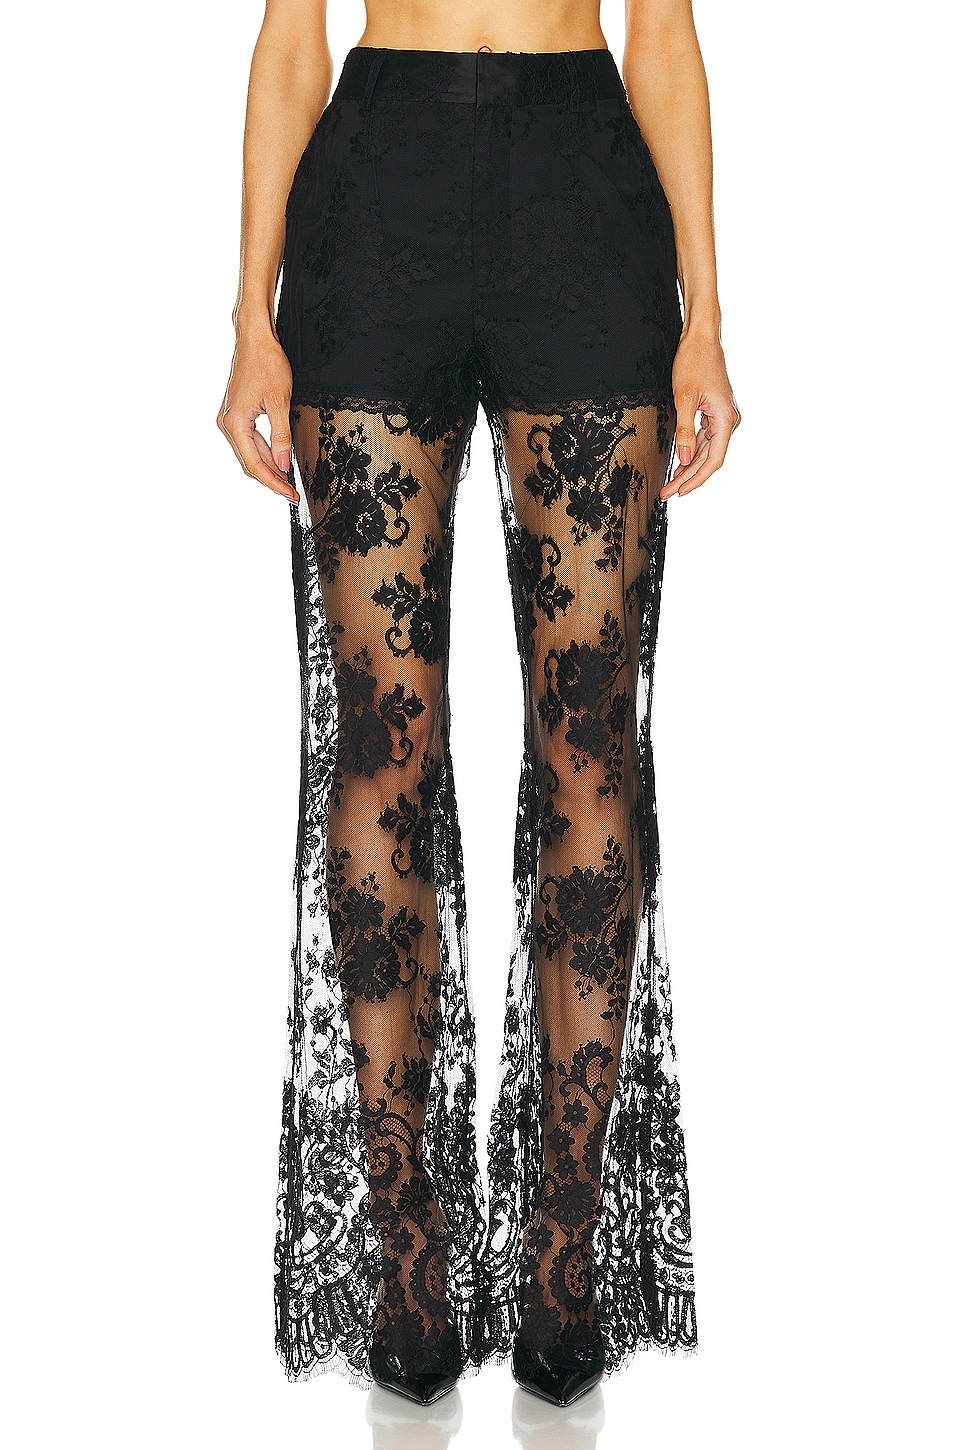 Image 1 of Monse Floral Lace Pant in Black